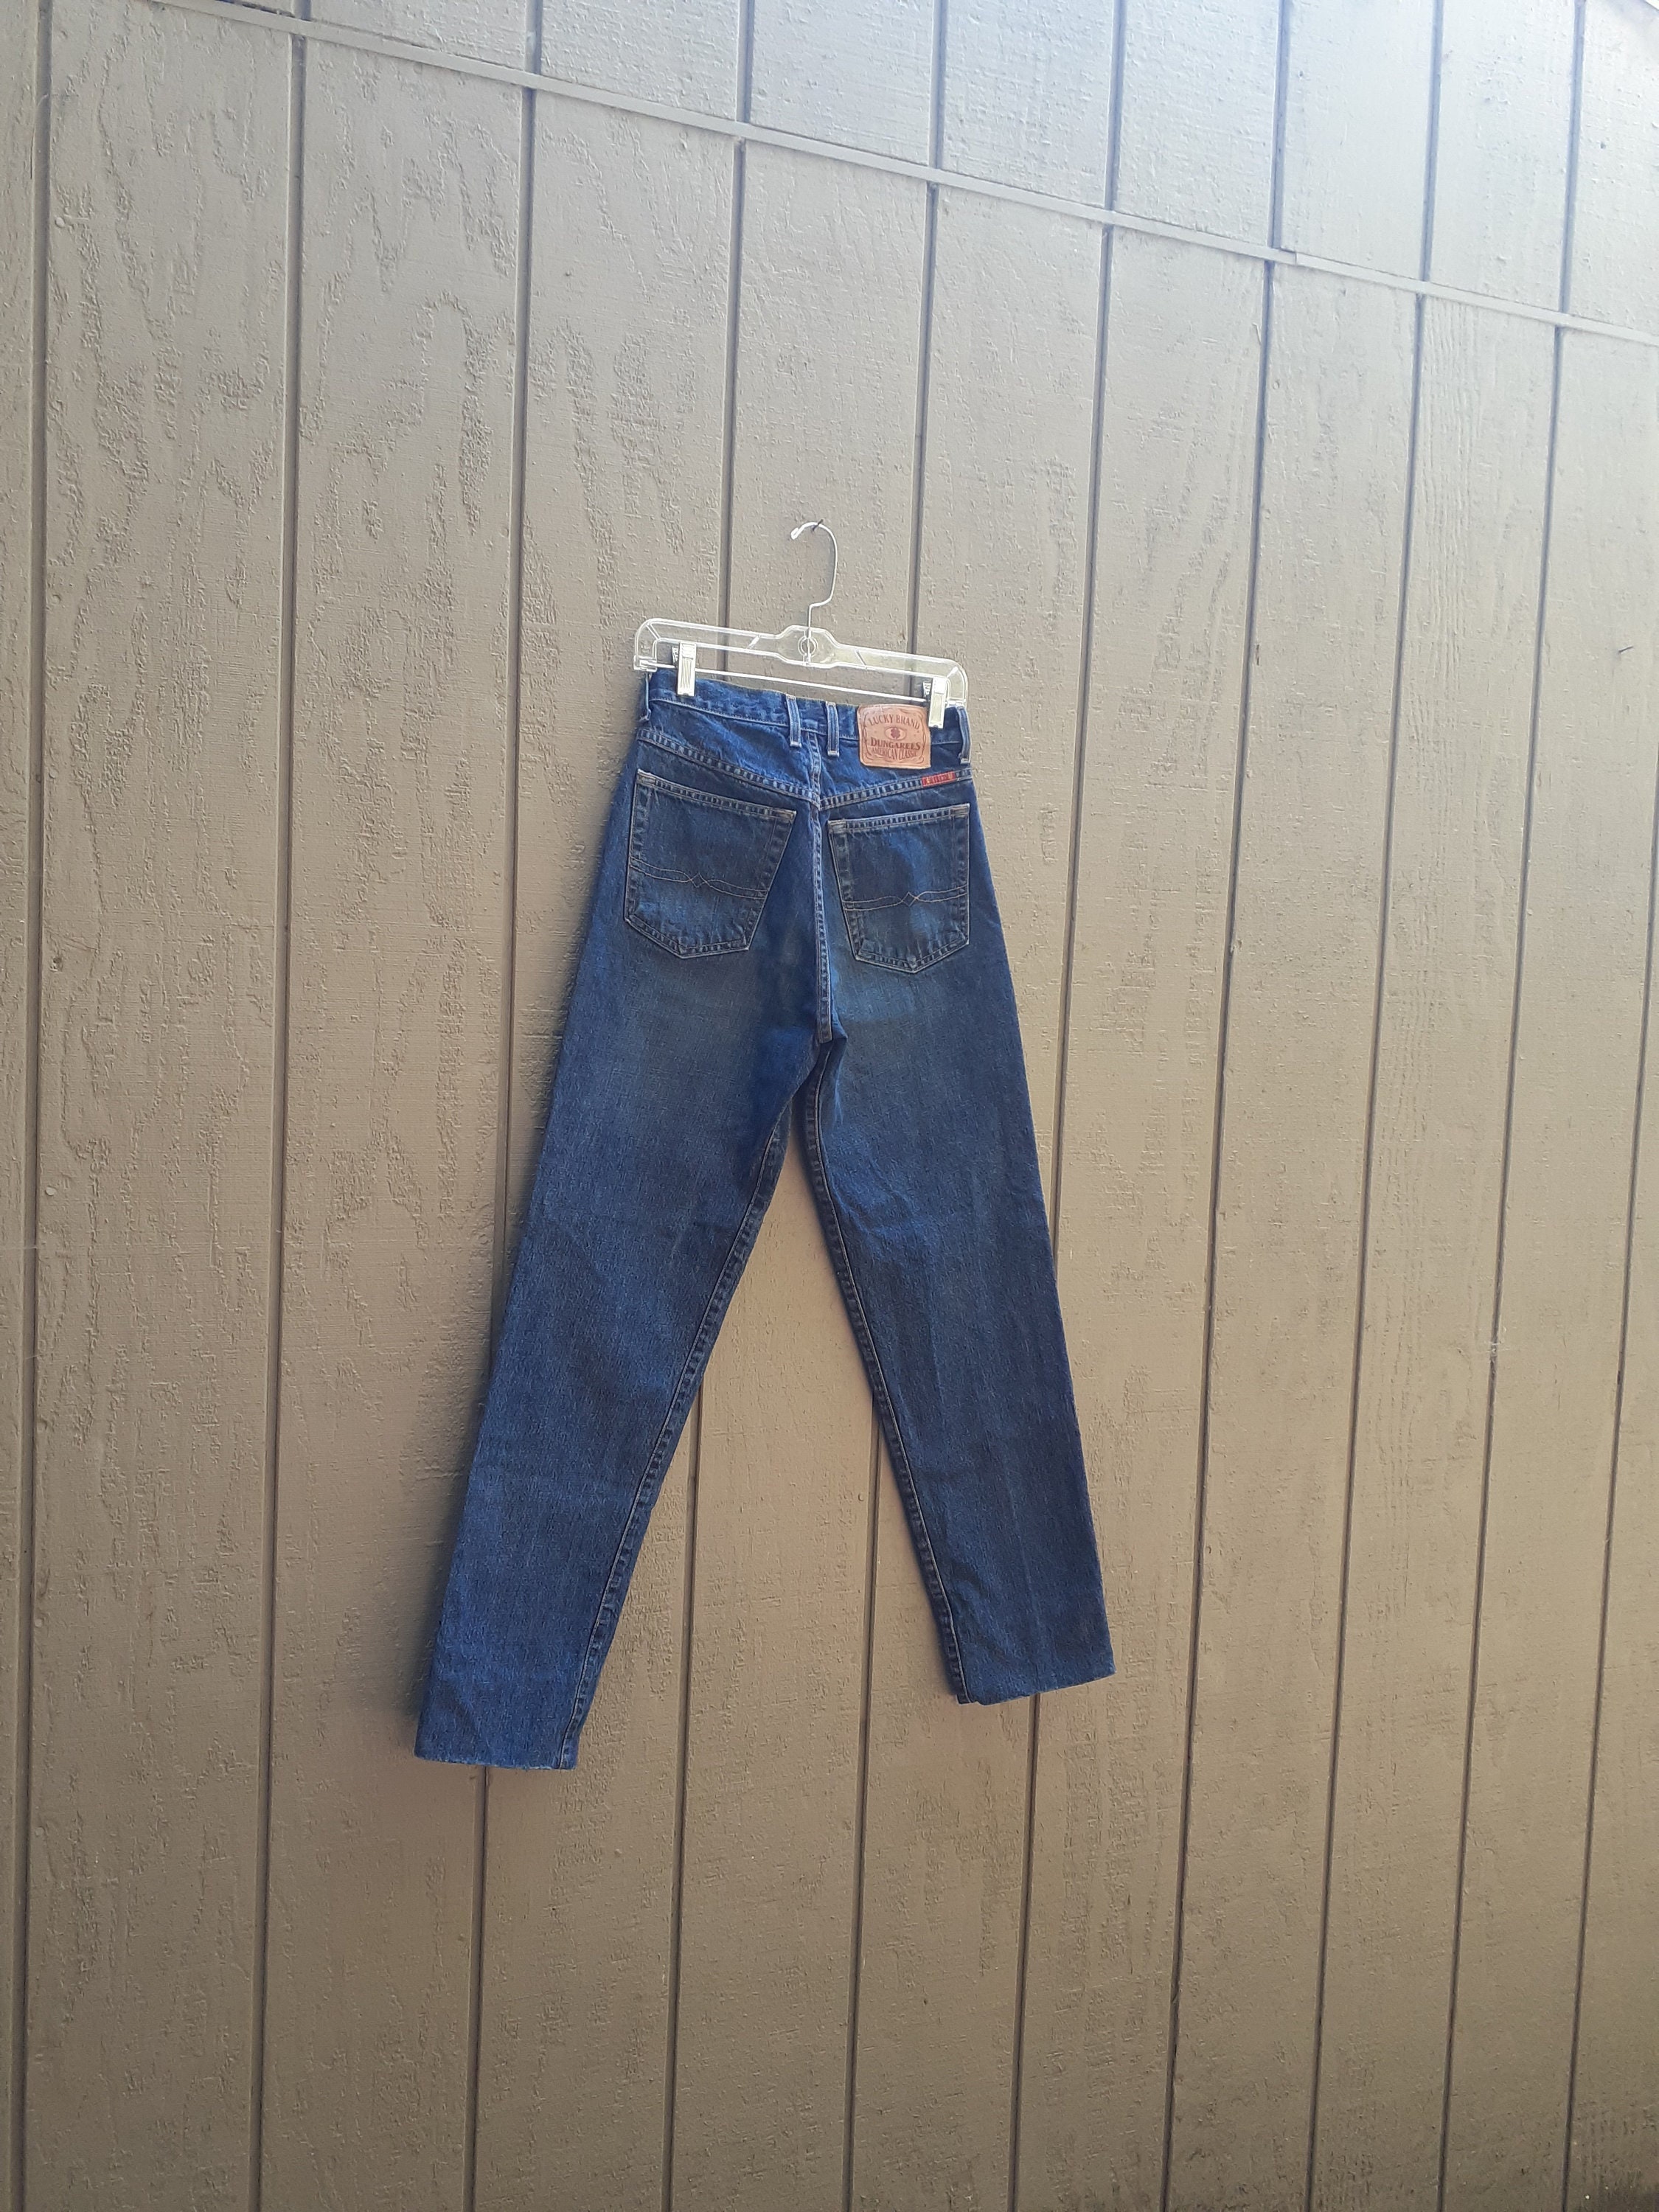 Y2K LUCKY Jeans M 12 31, Vintage Blue Mid Rise sweet 'N Straight